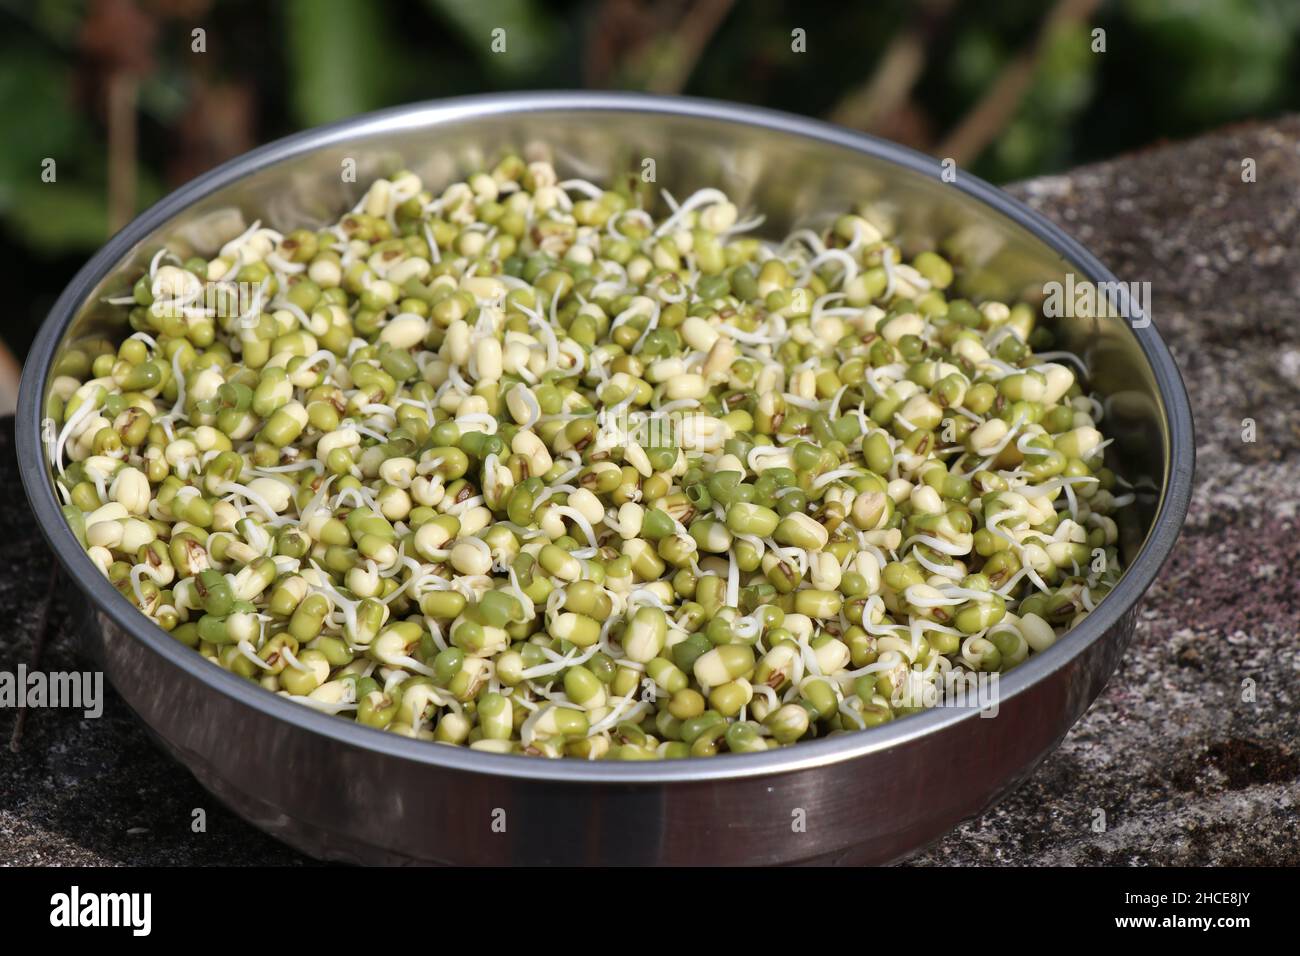 Bowl of green gram sprouts ready to eat or for growing, Germinated mung beans Stock Photo